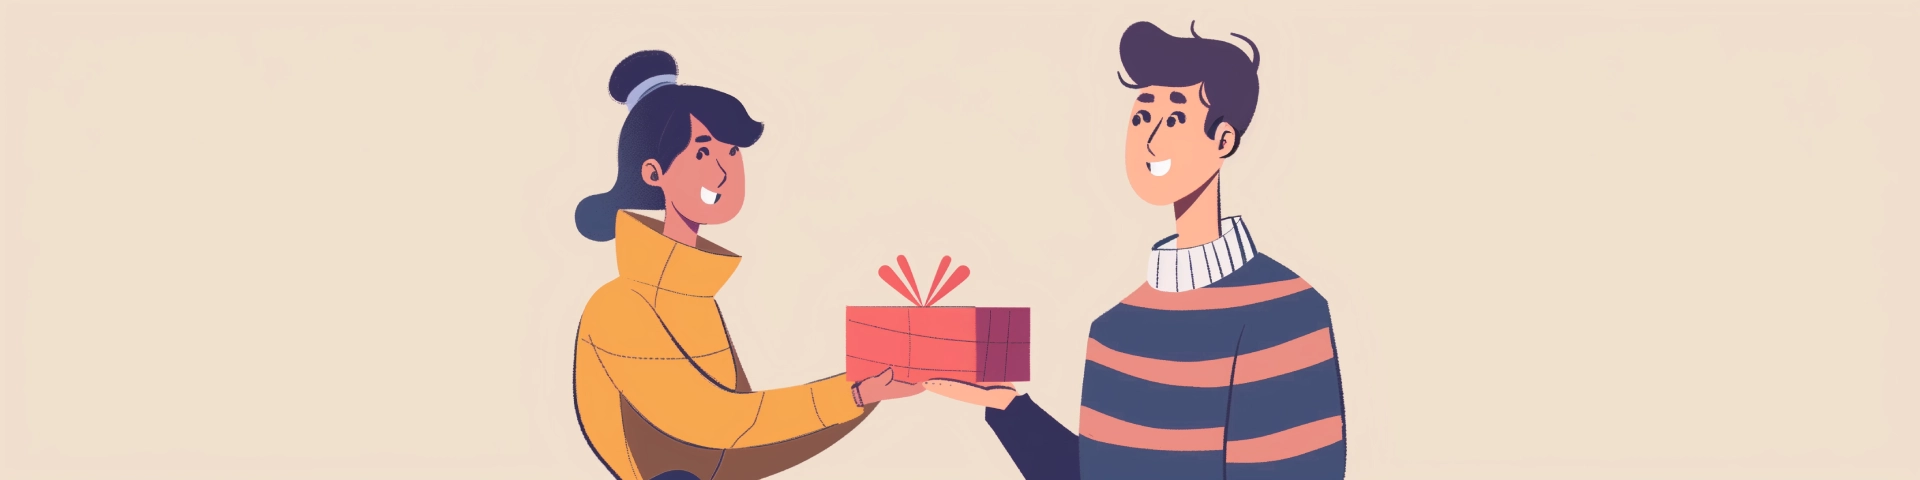 Person giving another person a gift cartoon banner